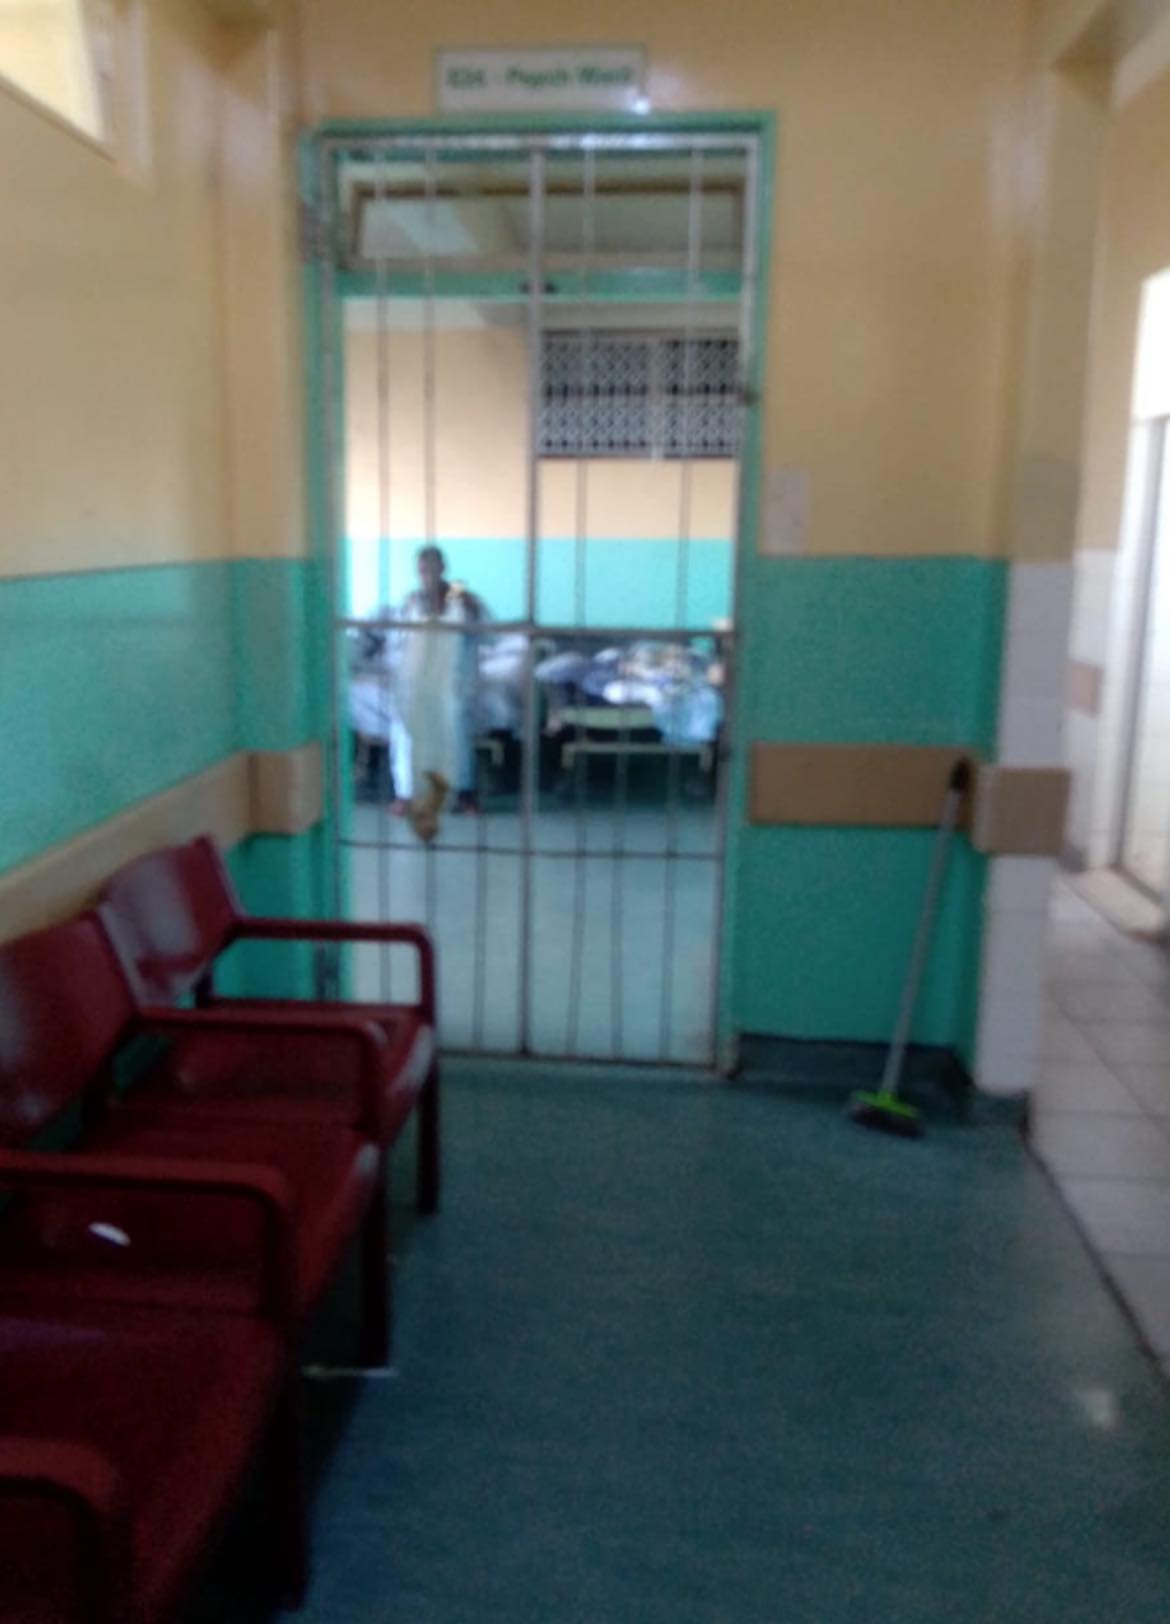 Psychiatric patients attacked and robbed in a government hospital in Osindisweni